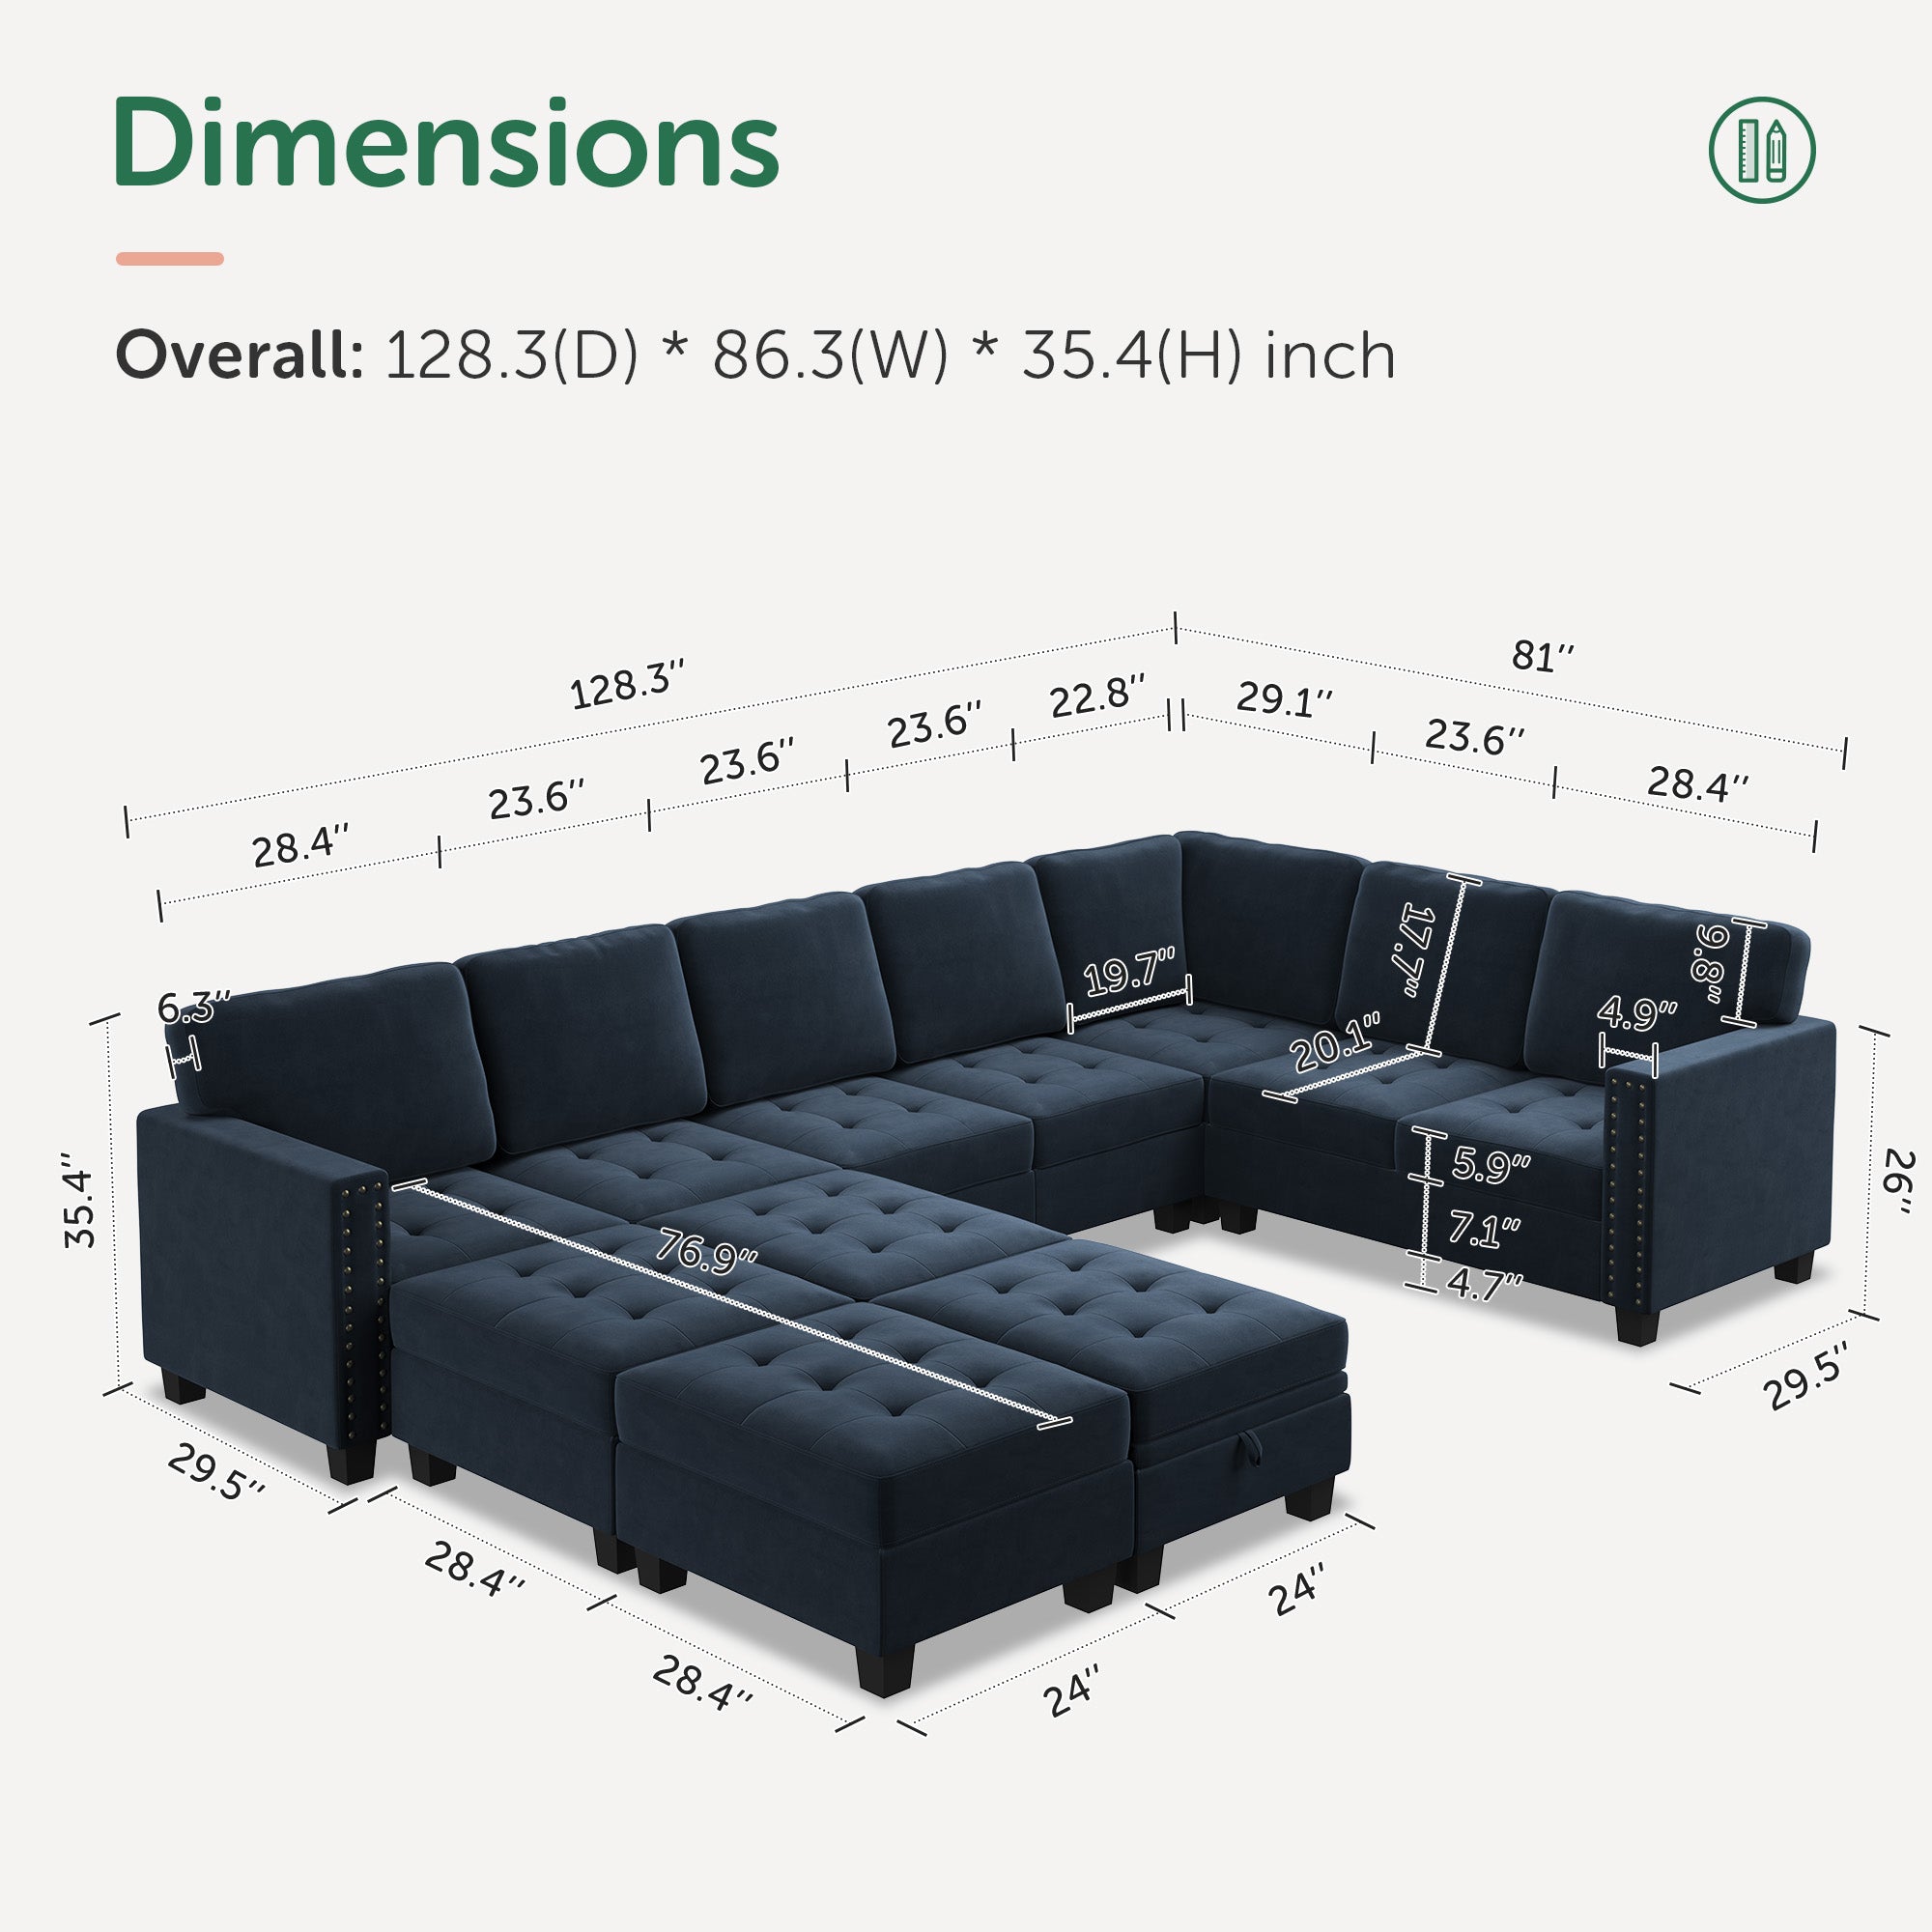 Velvet Modular Sleeper Sectional With Storage Space With Measurements